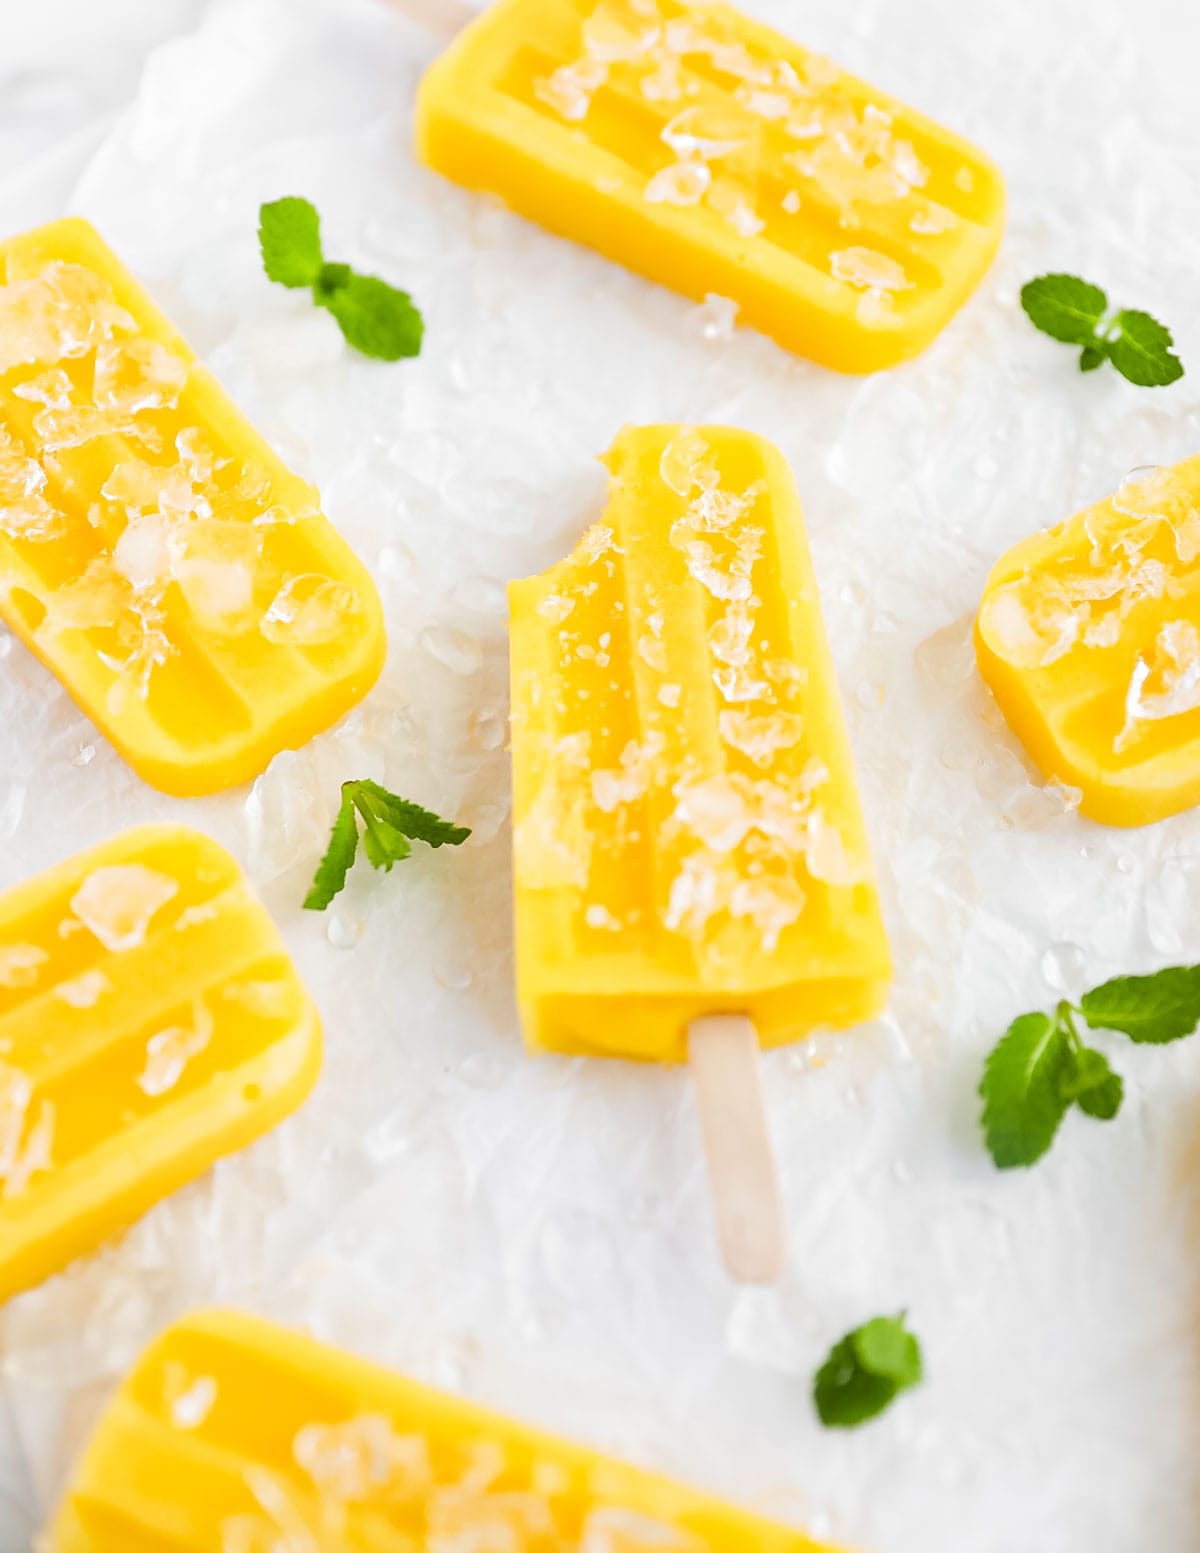 several yellow/orange popsicles, the one in the middle has a bite taken out of it. They are all covered with and surrounded by ice